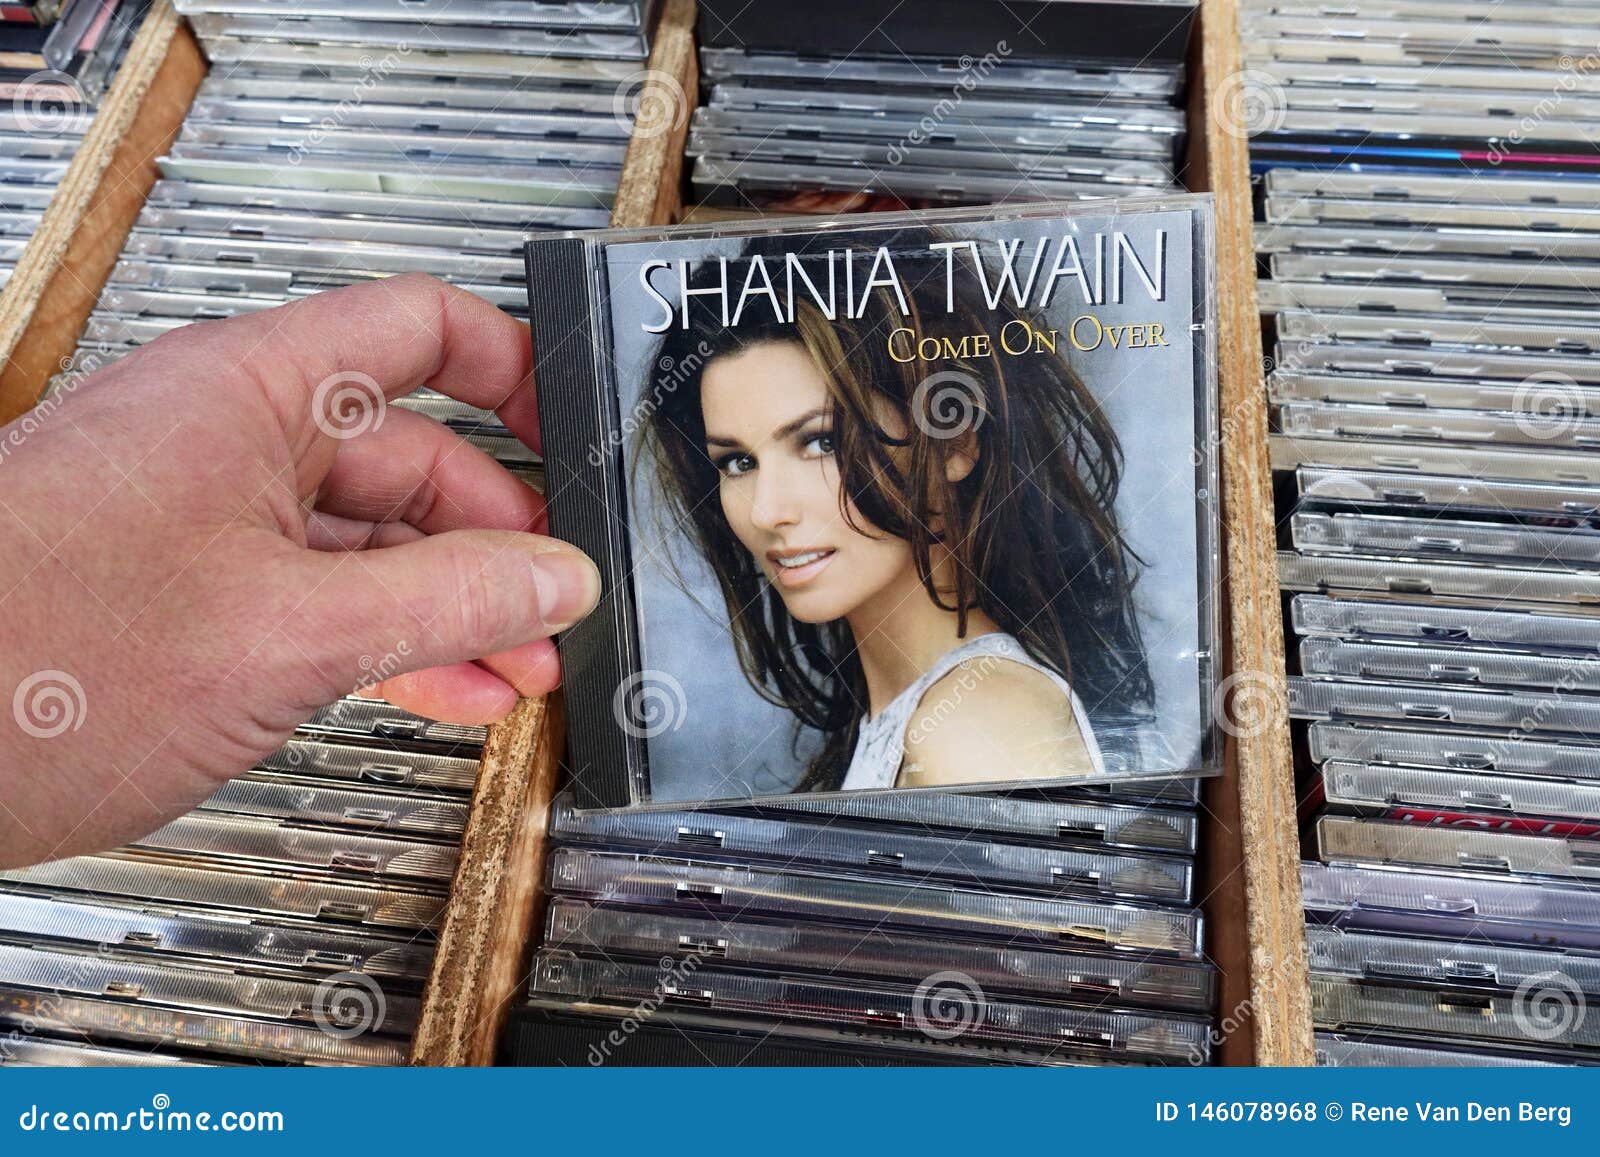 shania twain come on over album download